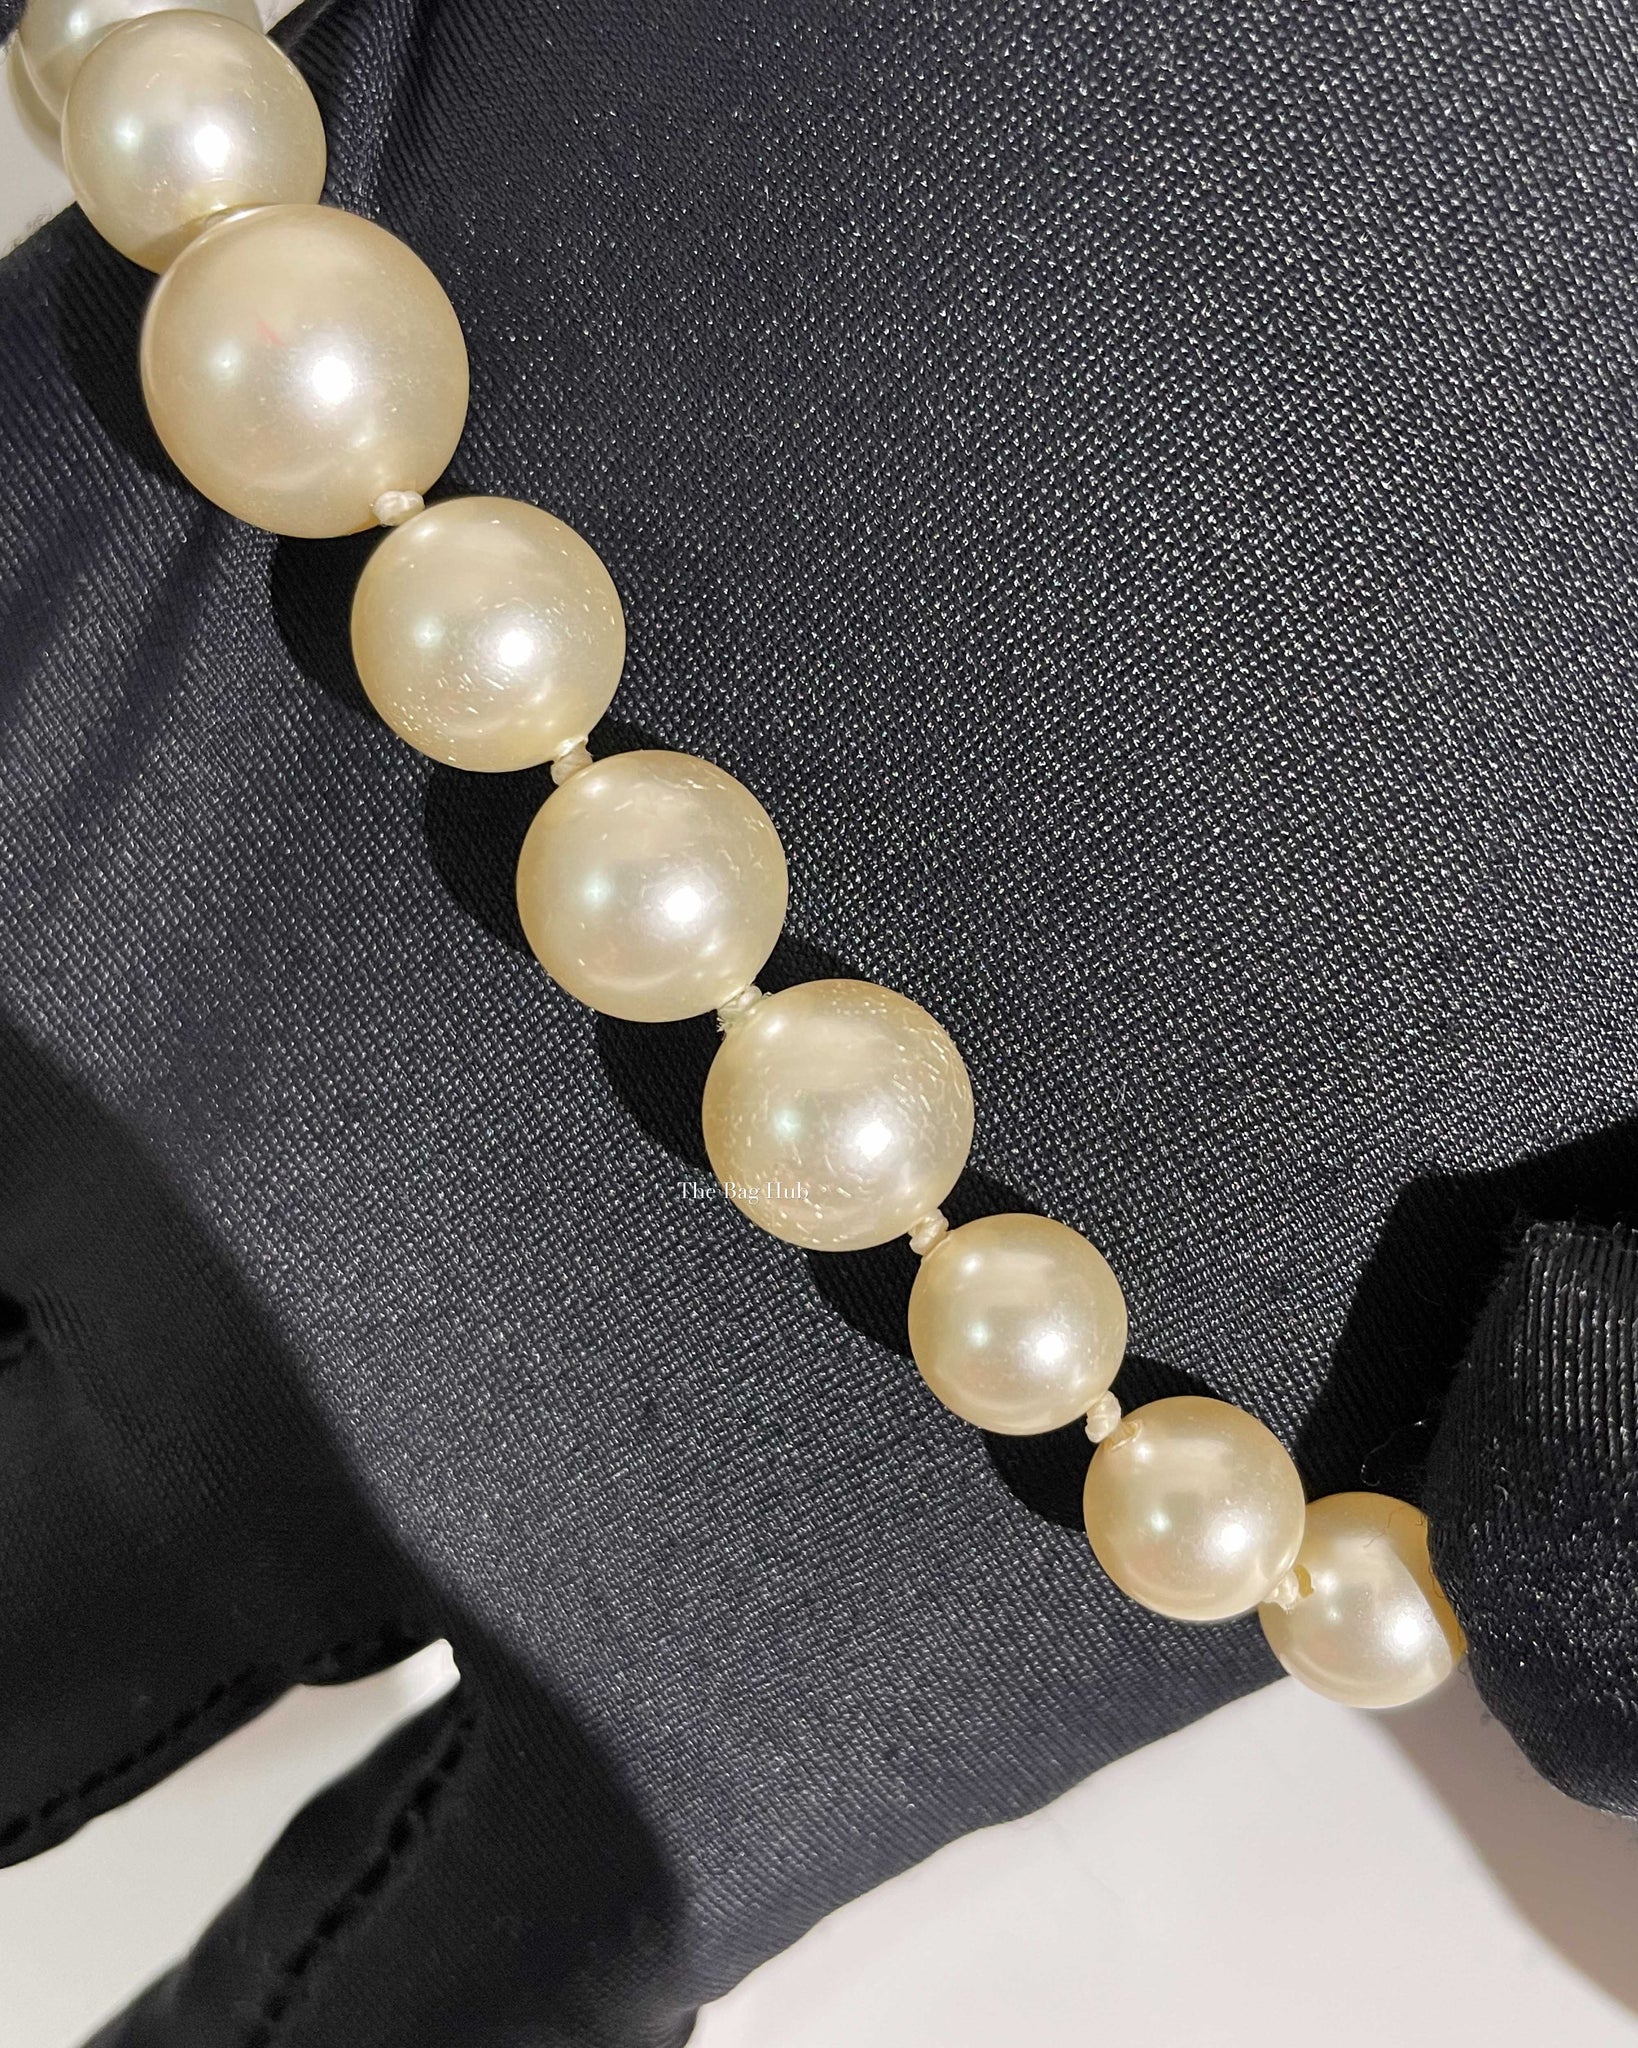 Chanel CC Pearl Long Necklace, Designer Brand, Authentic Chanel